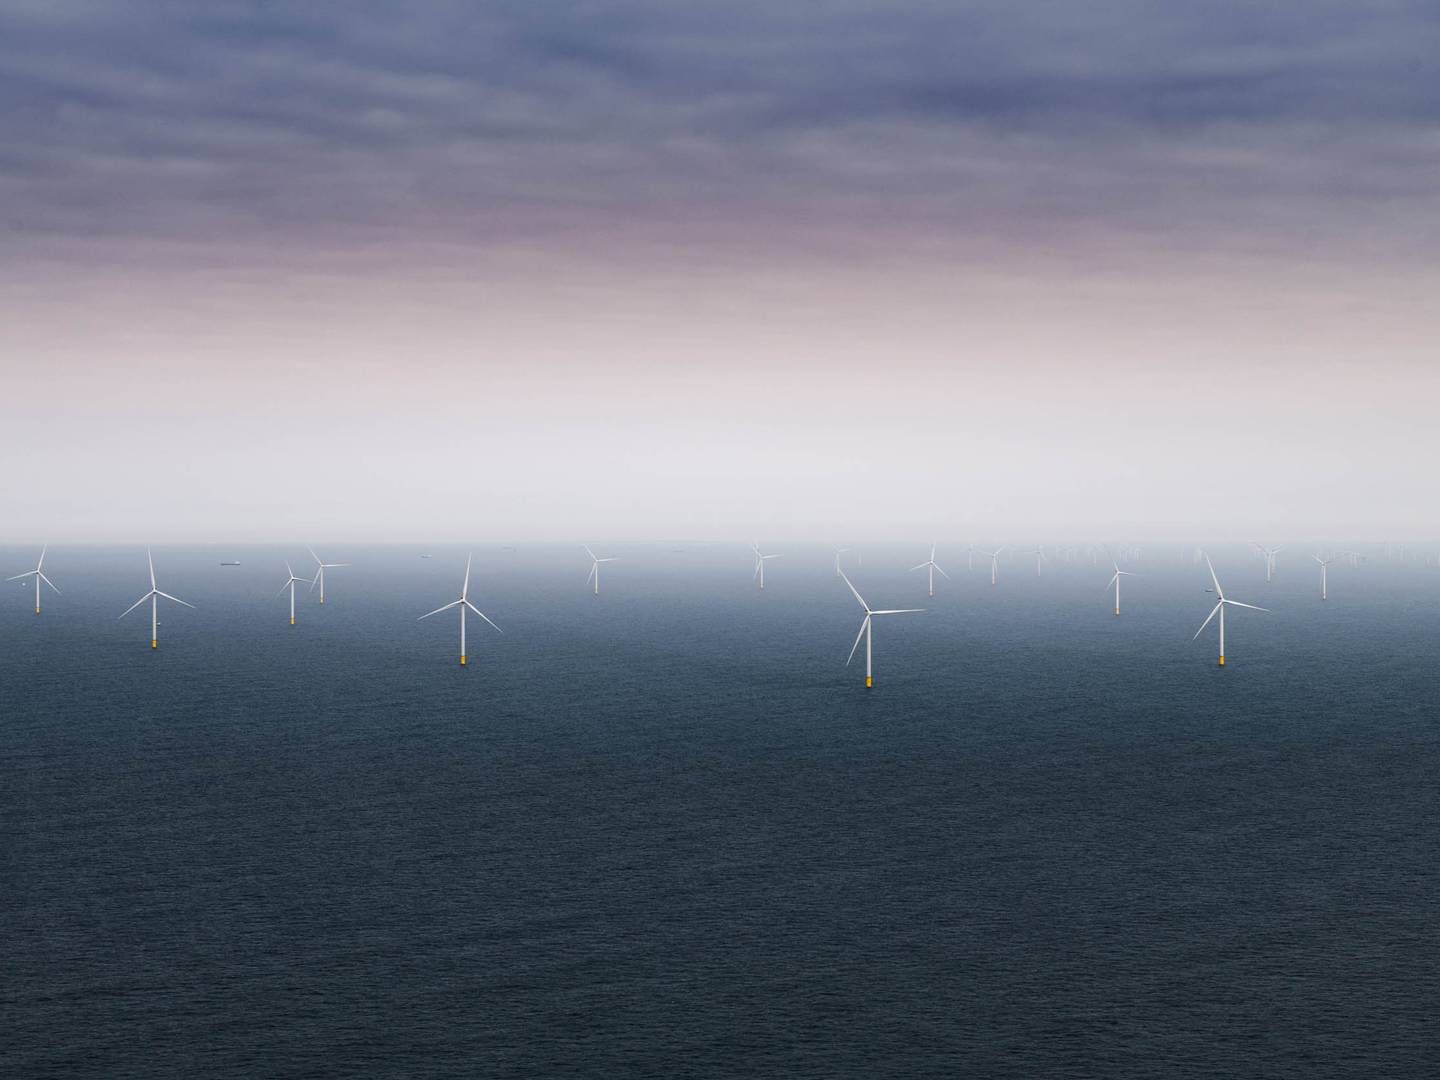 Finland has yet to have its first offshore wind farm - here are the turbines from Hollandse Kust Zuid off the Dutch coast between the towns of Scheveningen and Zandvoort. | Photo: Siemens Gamesa